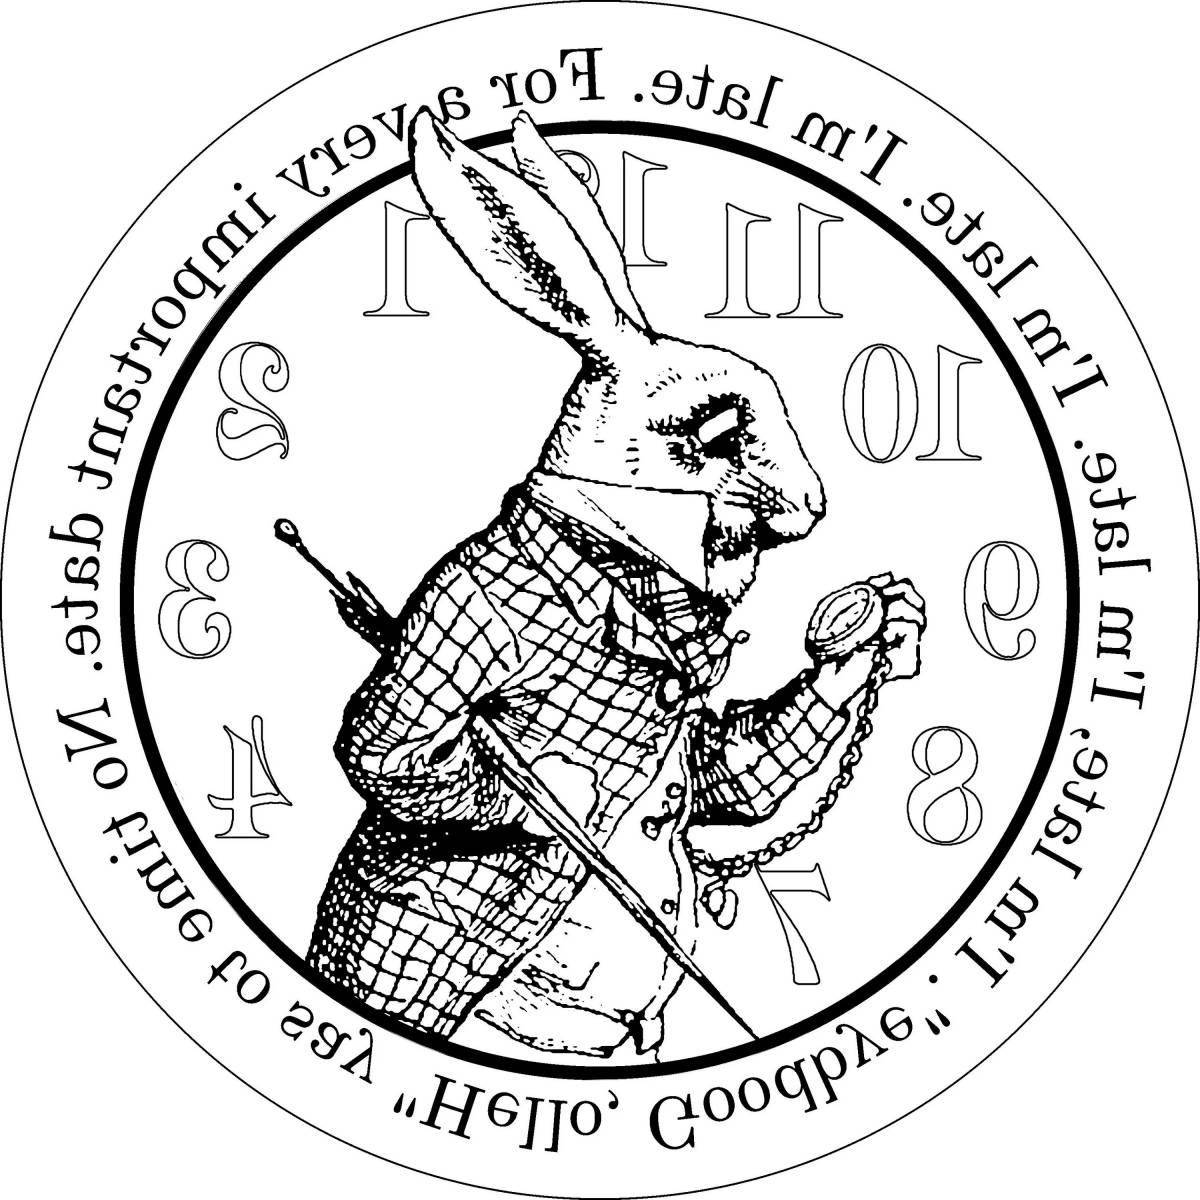 The adorable rabbit from Alice in Wonderland